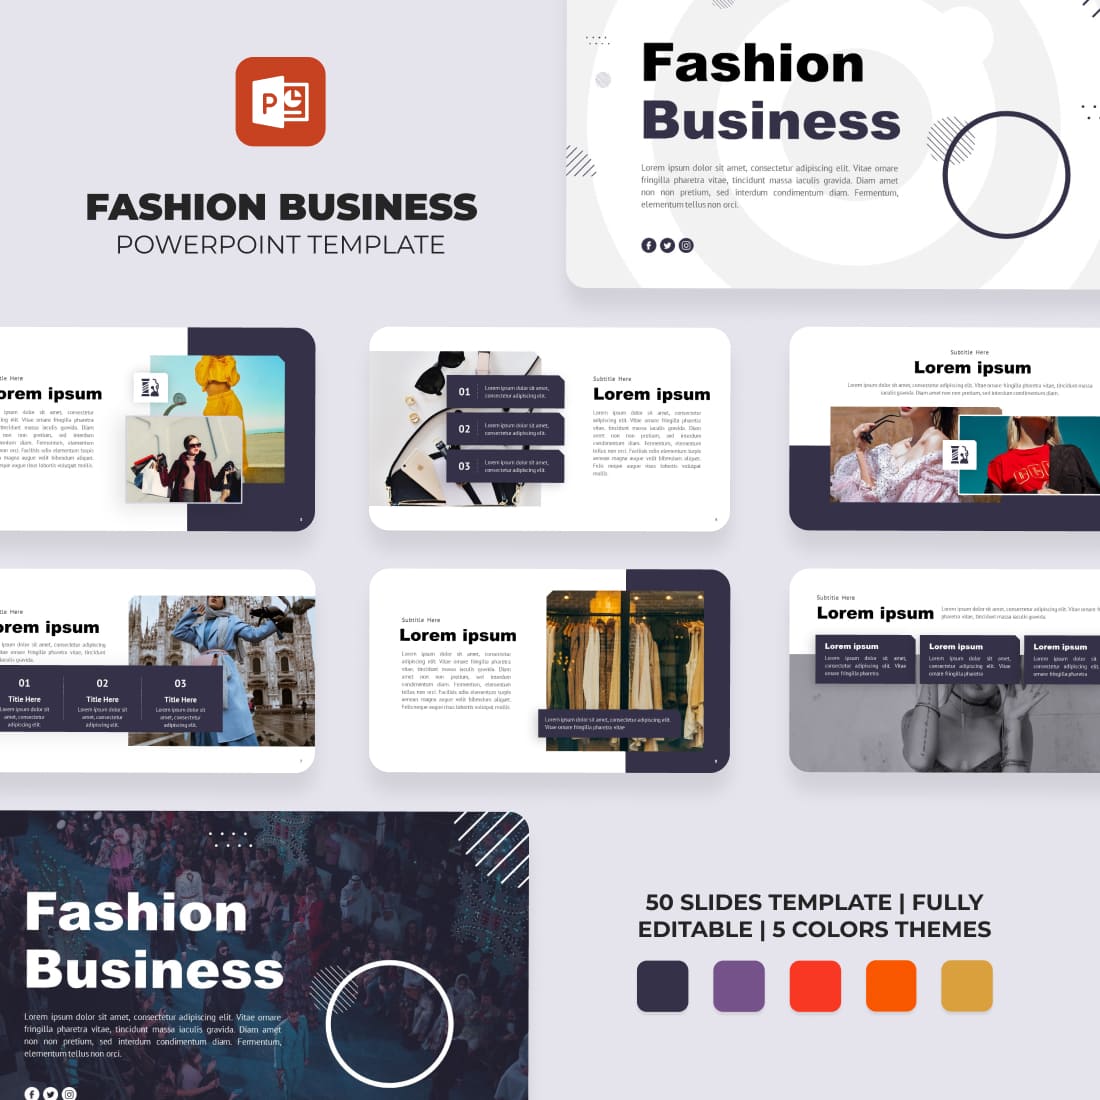 Fashion Business Powerpoint Template cover.